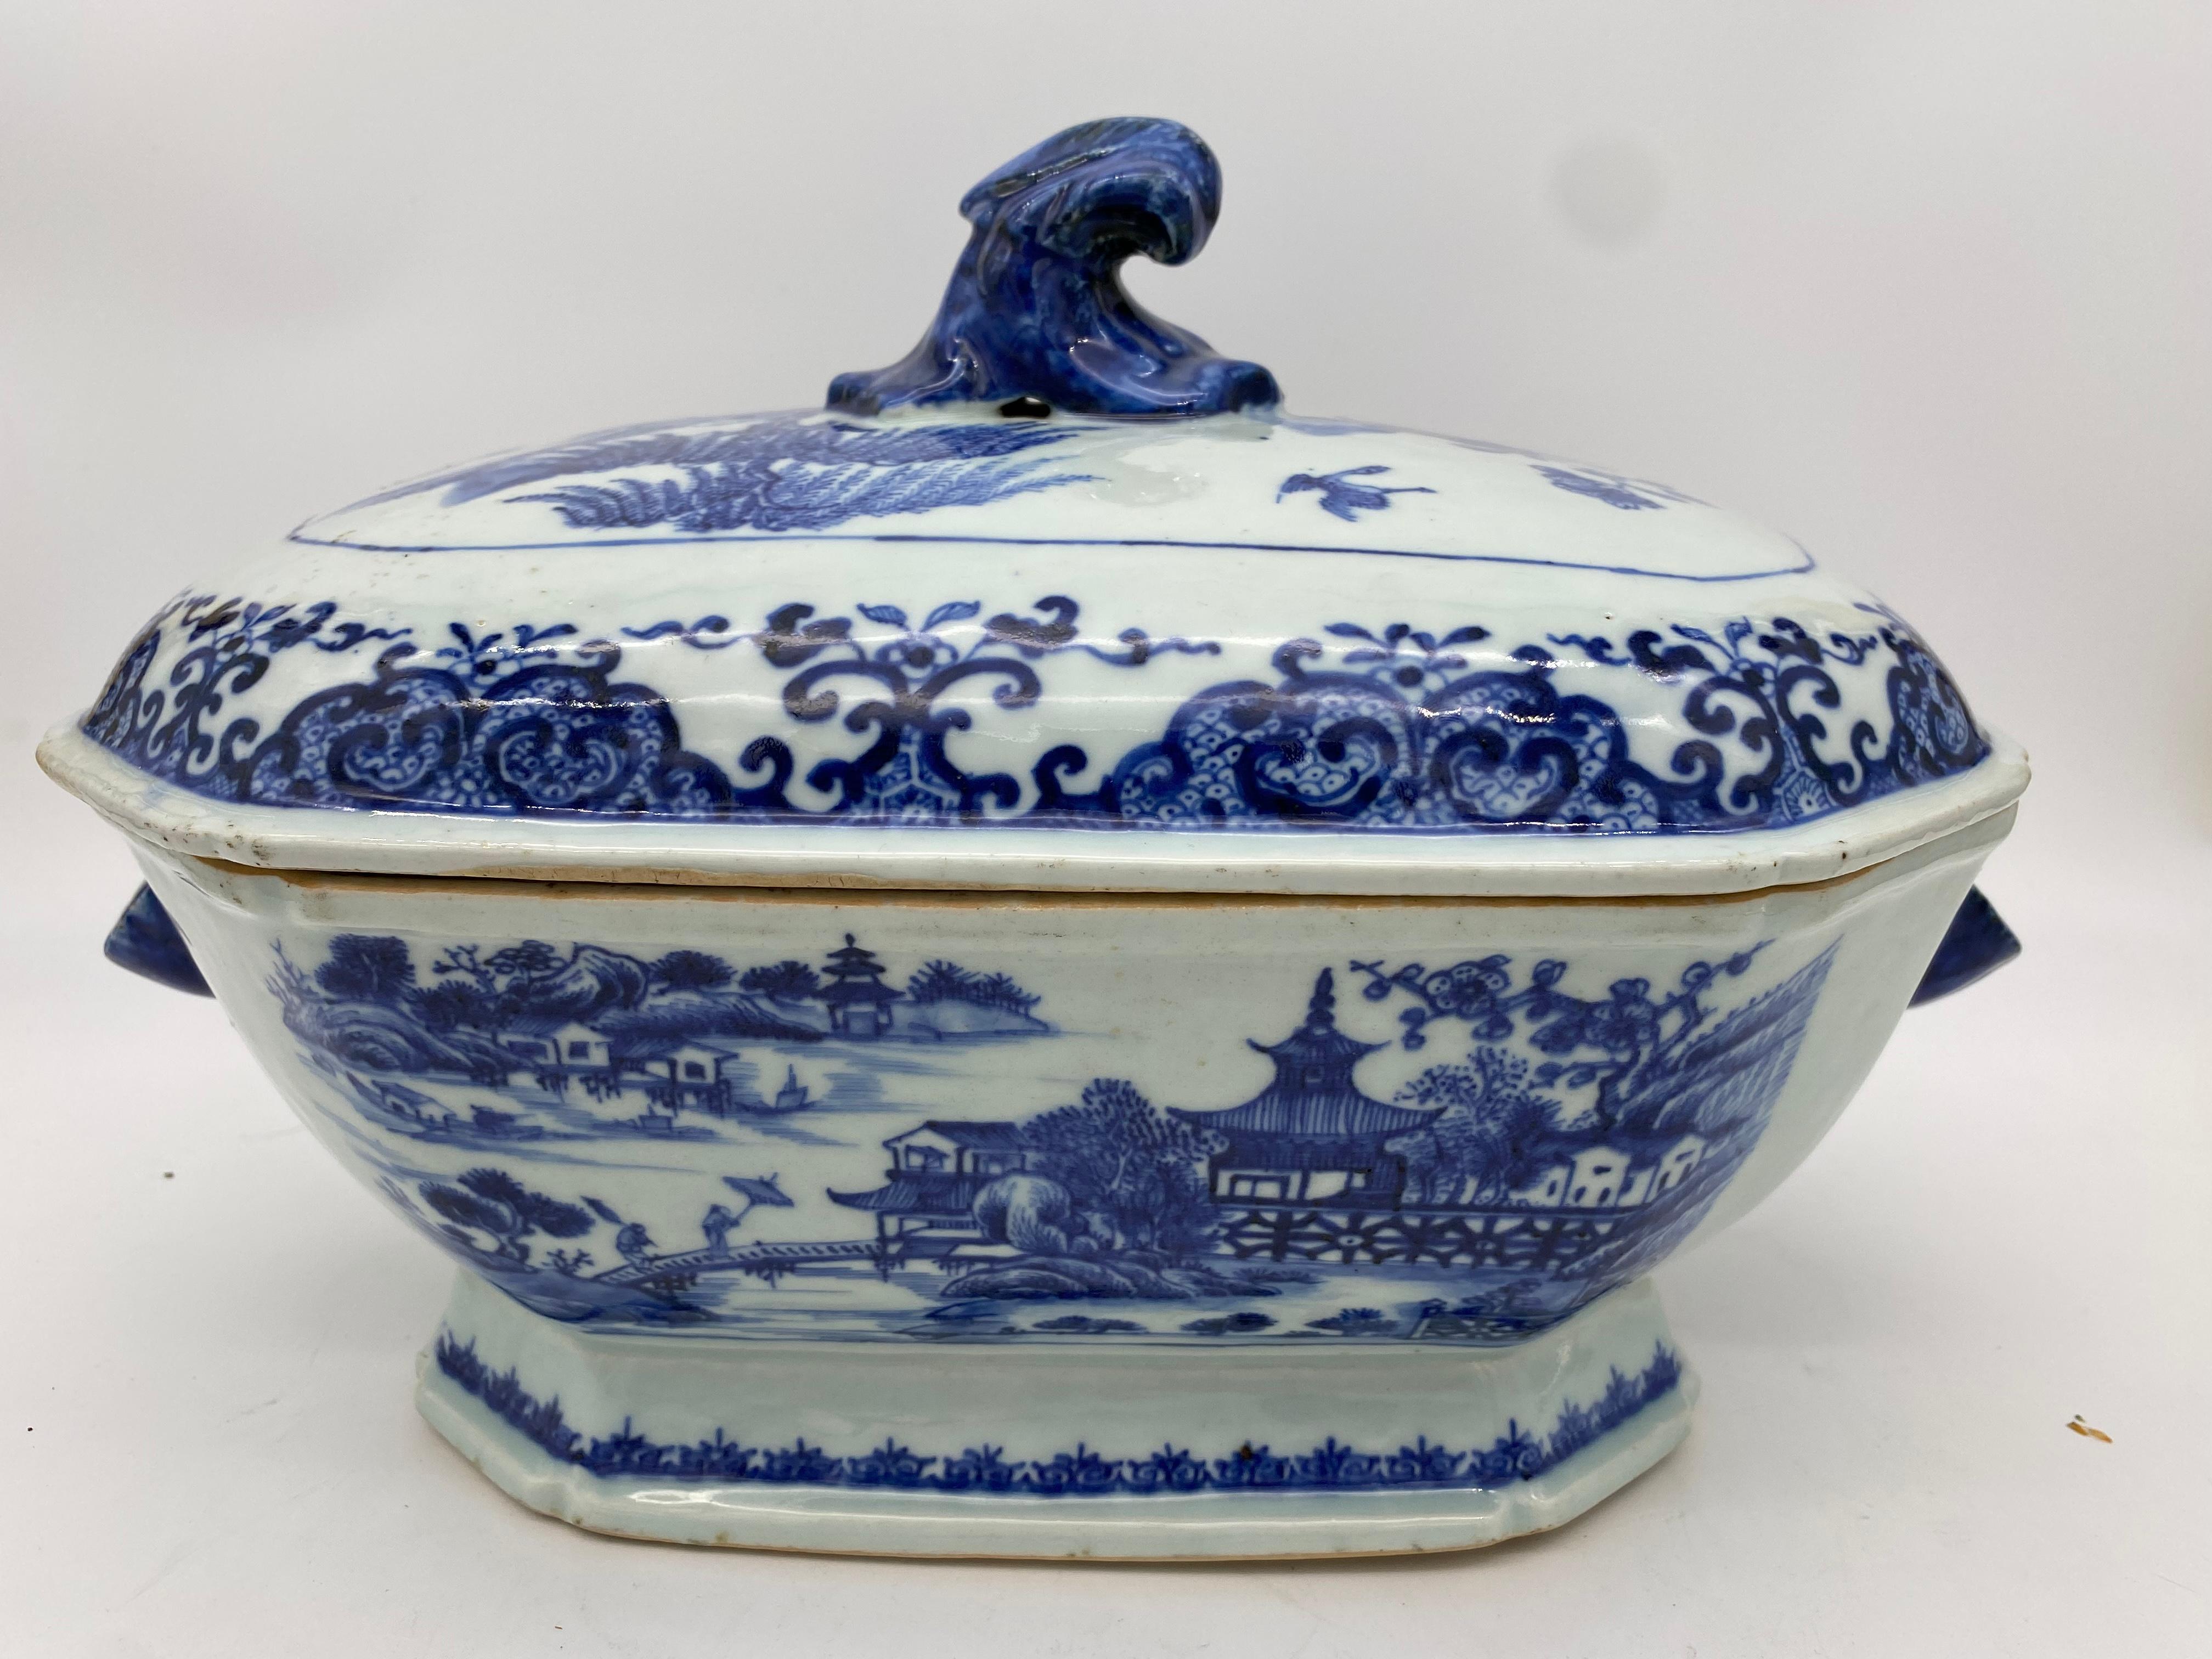 Hand-Carved 18th Century Blue and White Chinese Porcelain Tureen and Cover For Sale